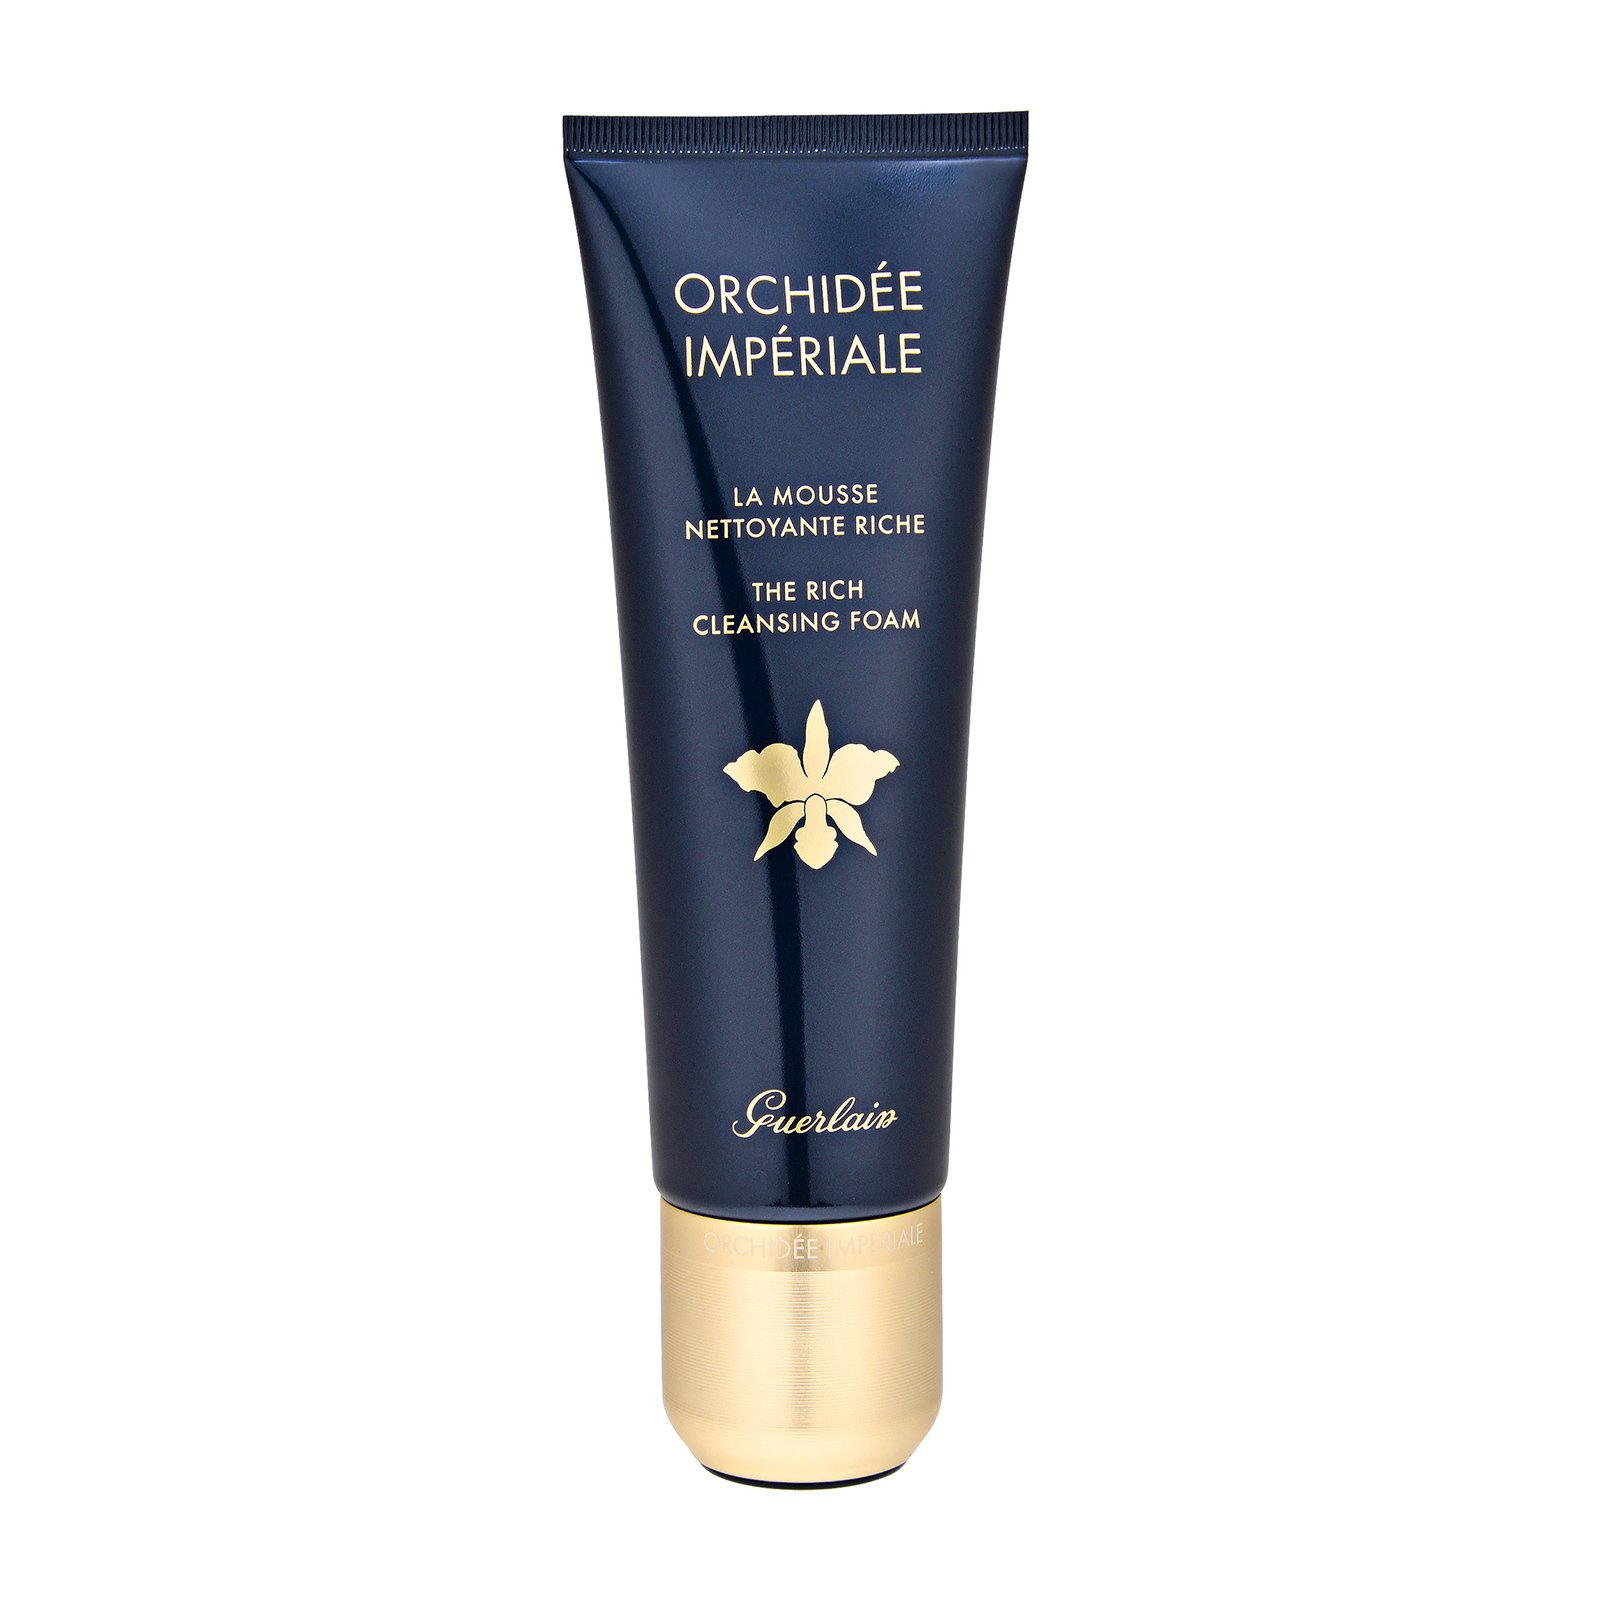 Orchidee Imperiale The Rich Cleansing Foam